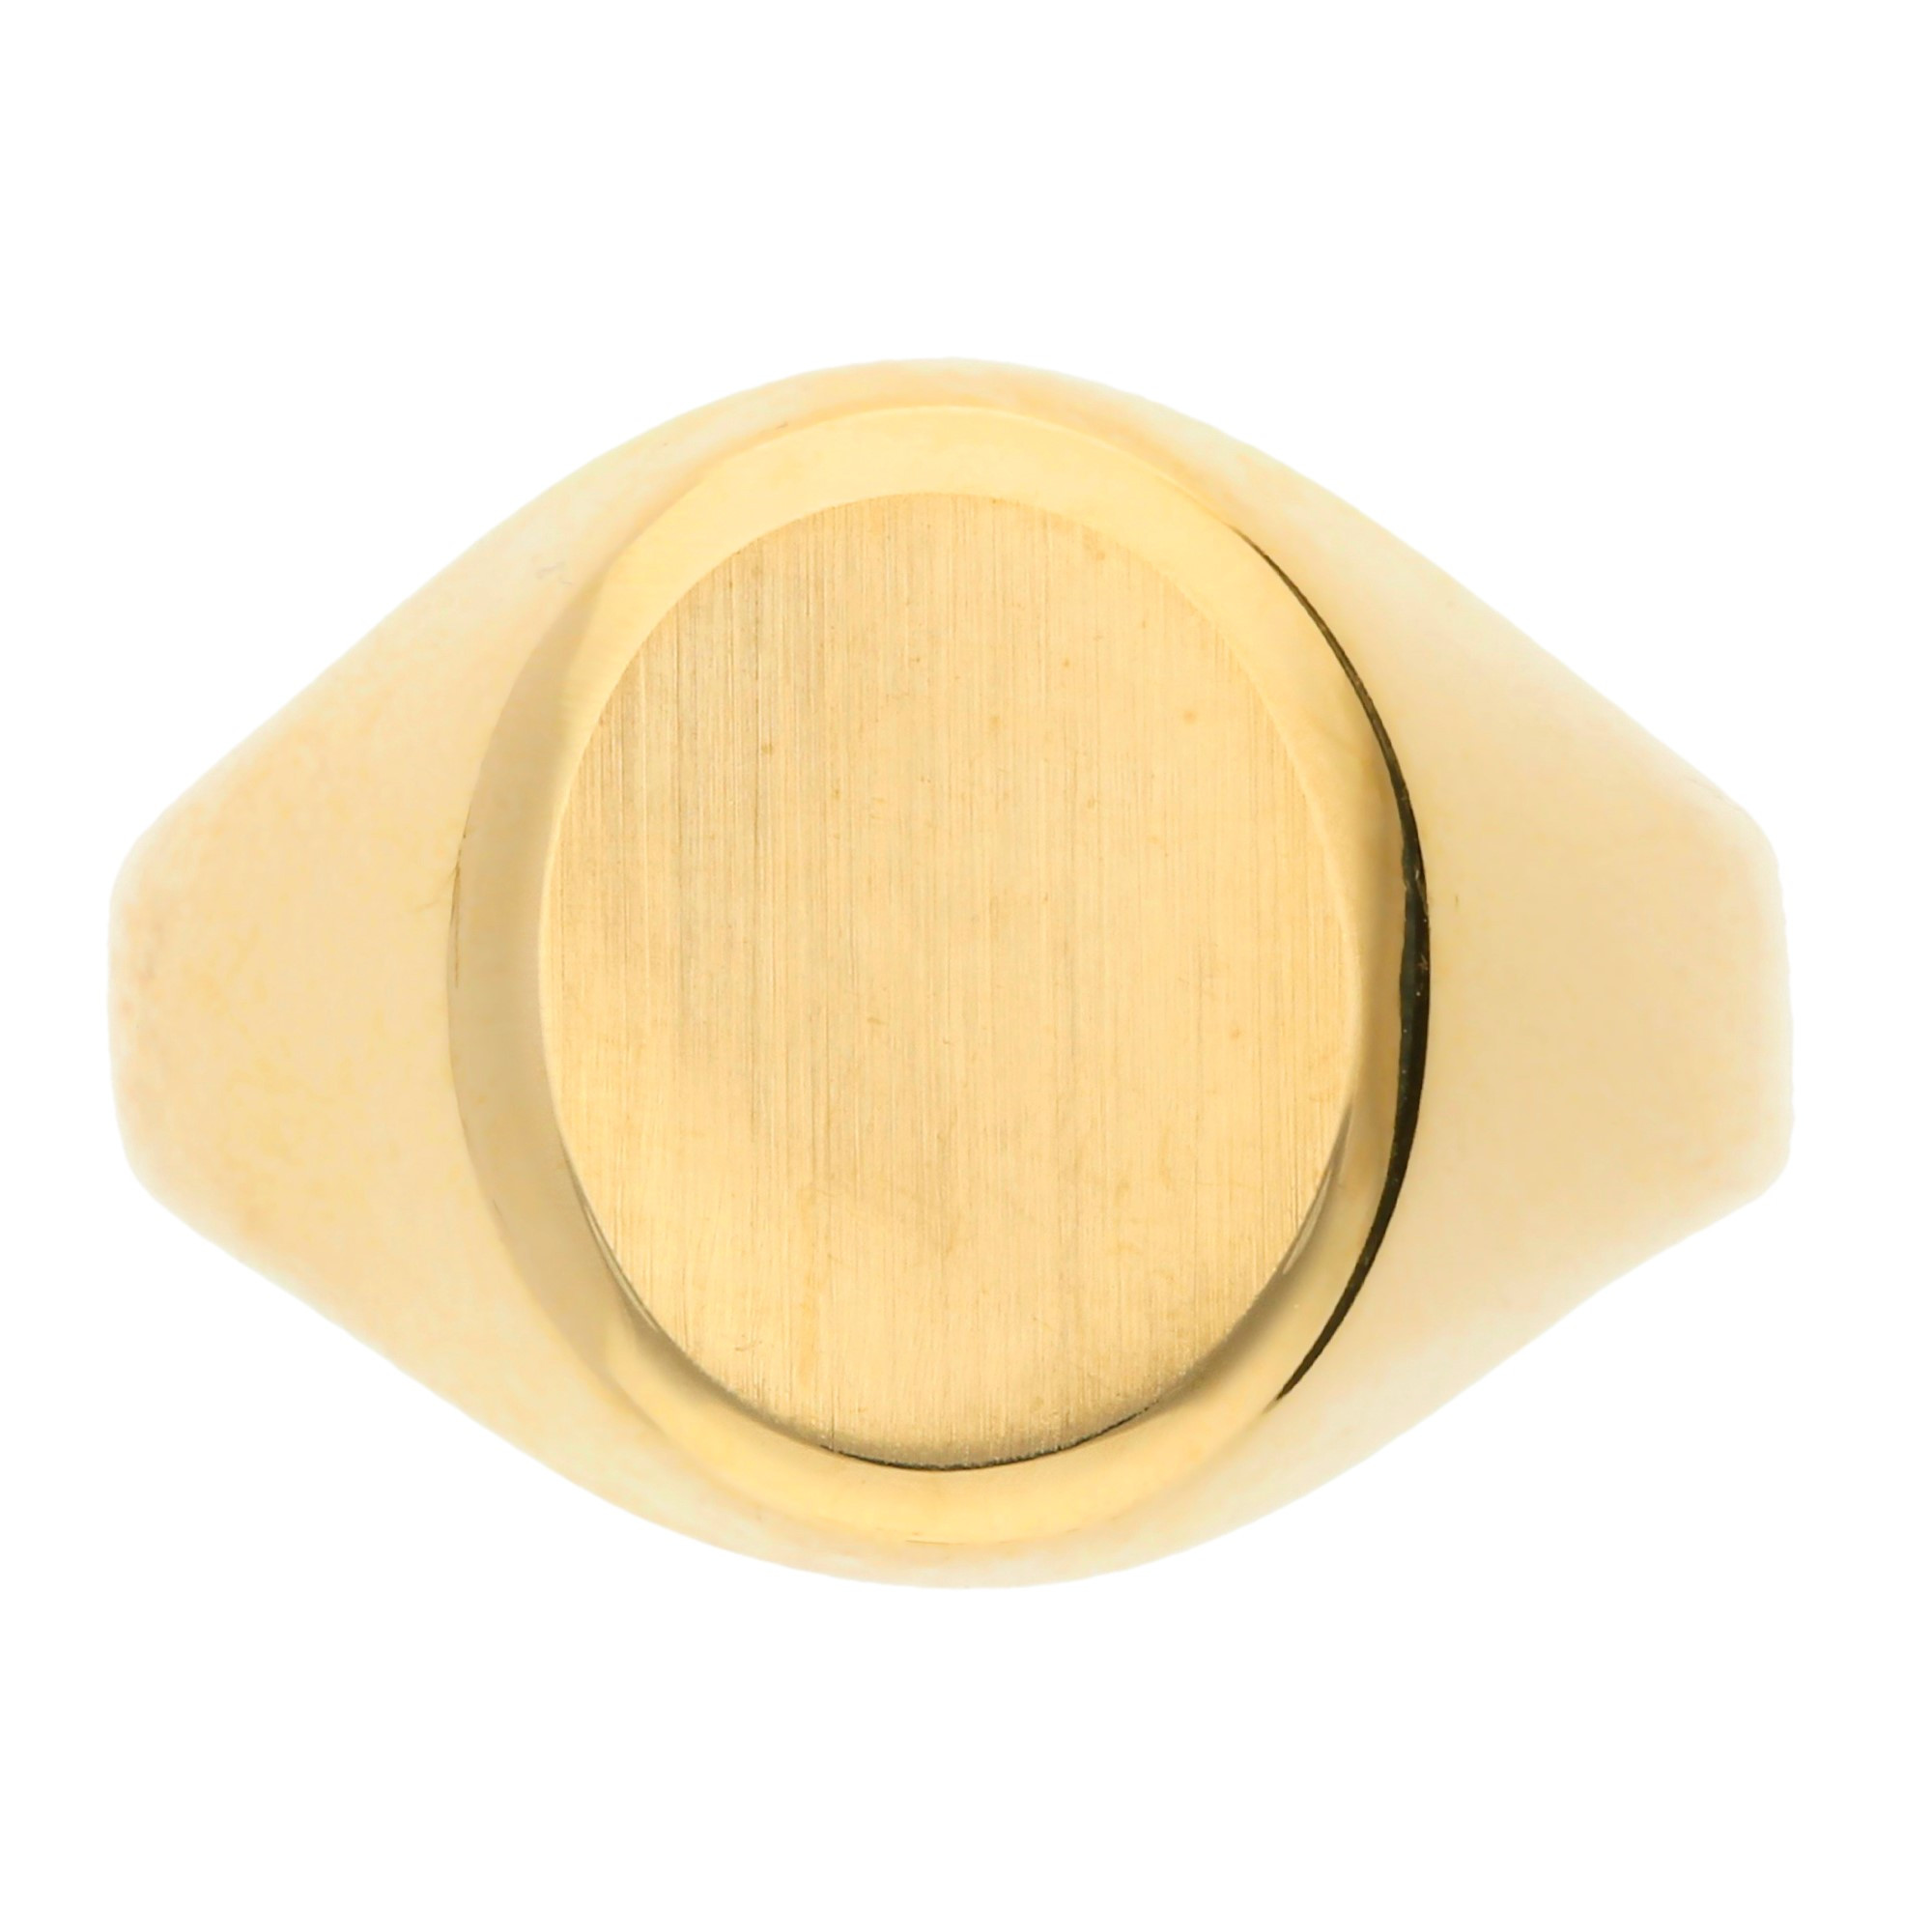 9ct Gold Signet Ring | Buy Online | Free Insured UK Delivery